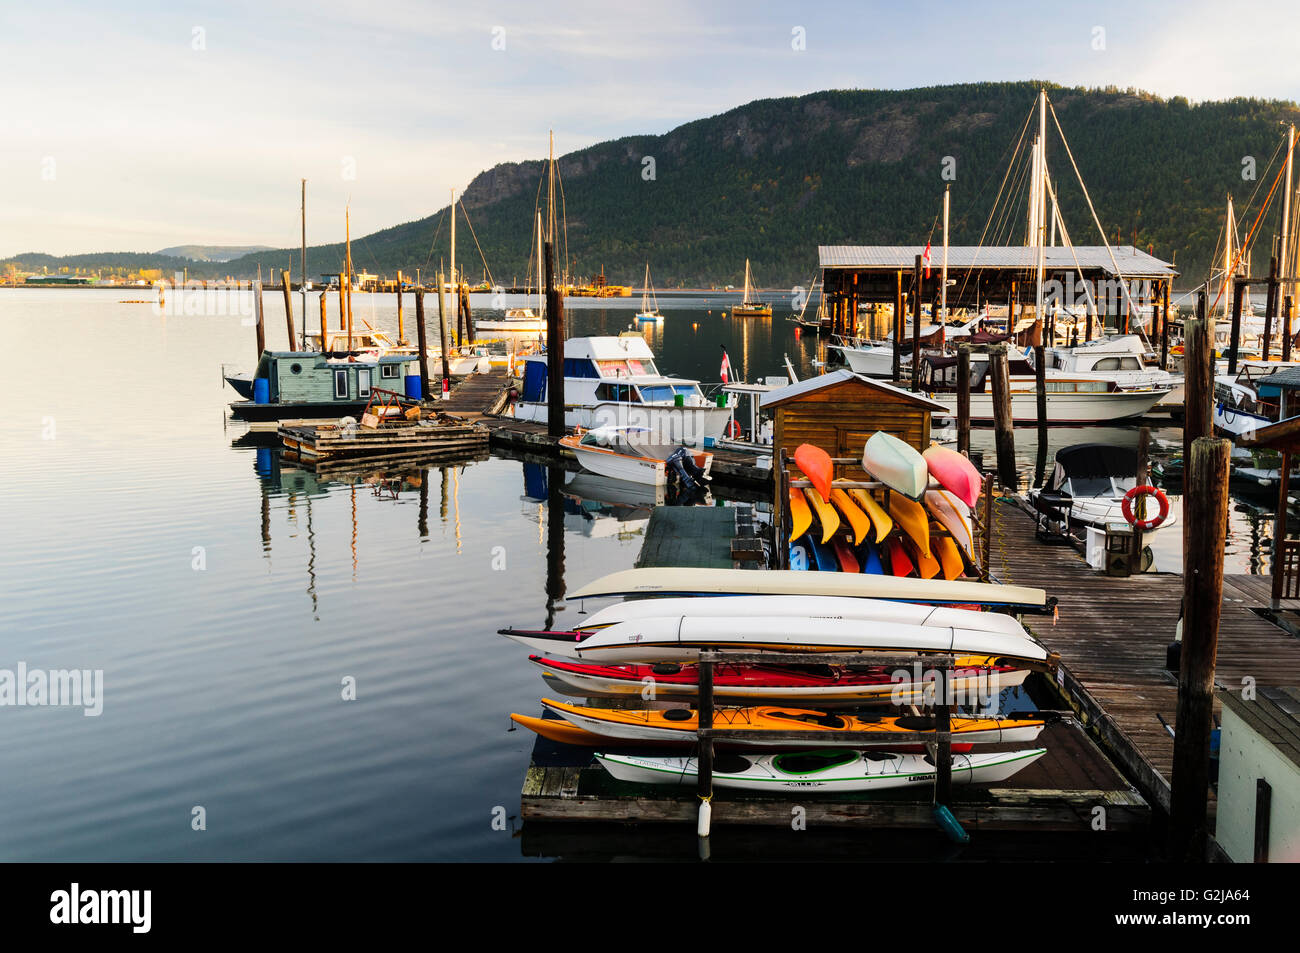 Kayaks, boats and float homes in Cowichan Bay near Duncan, British Columbia Stock Photo